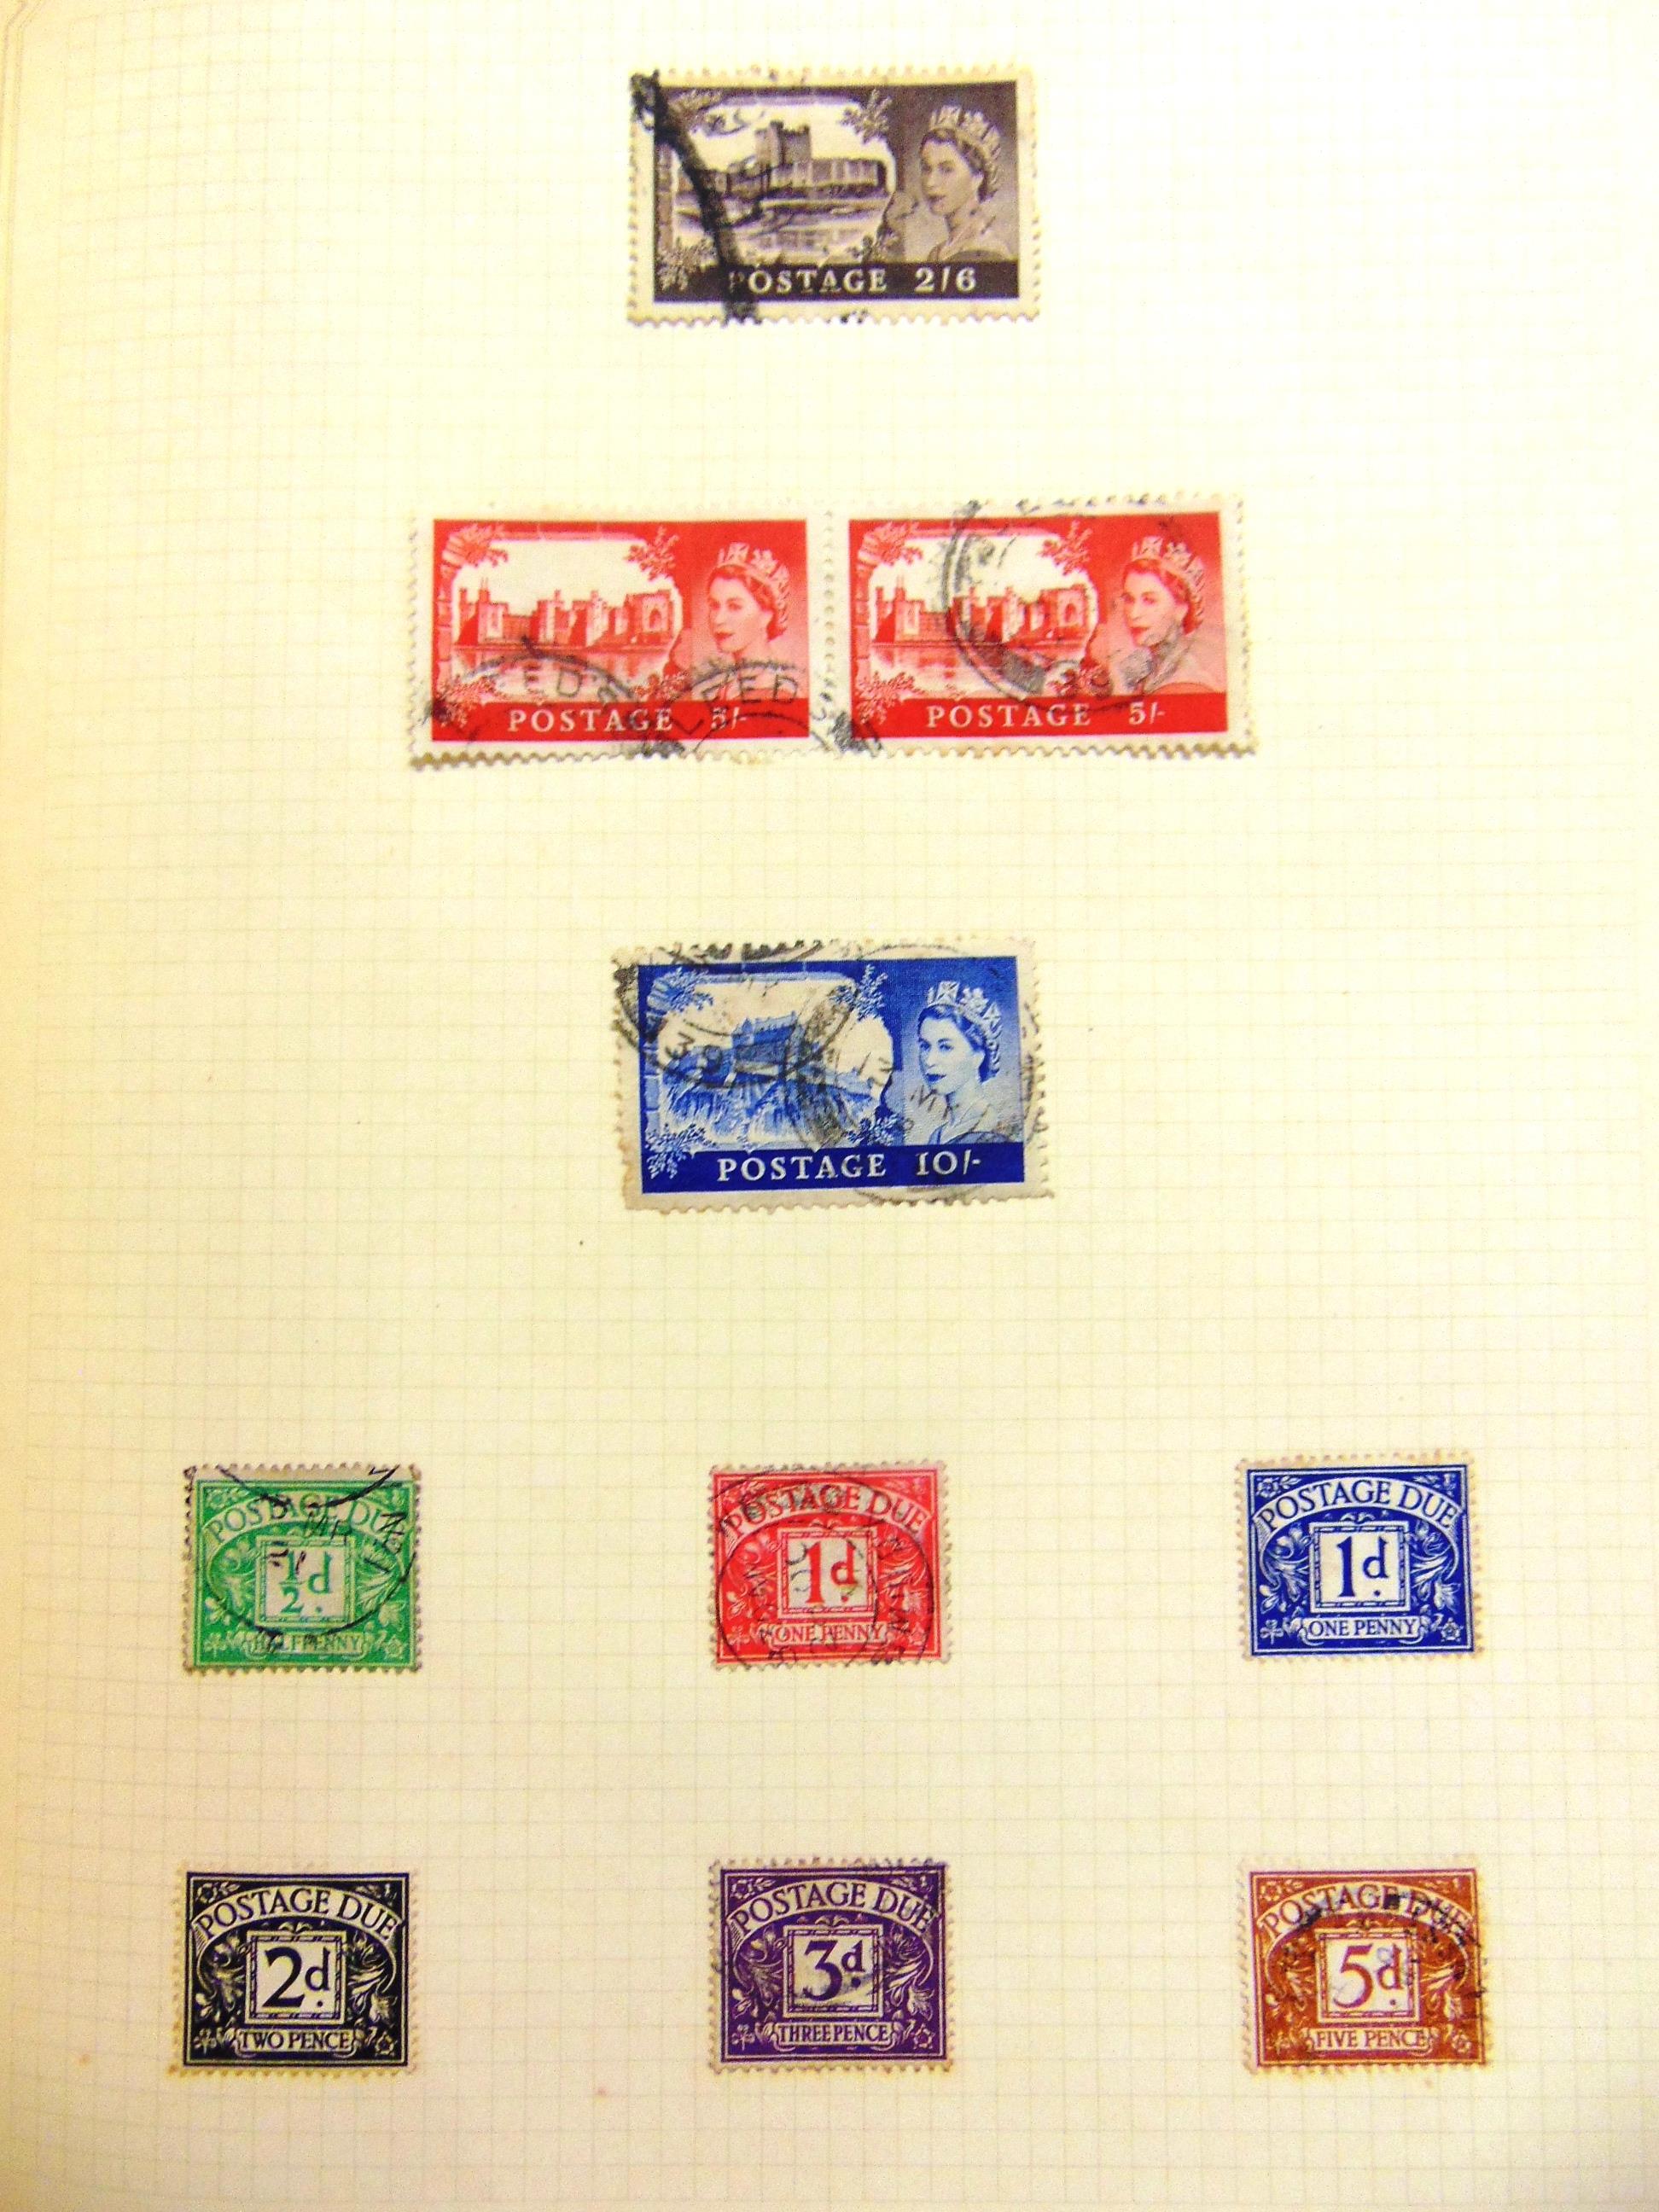 STAMPS - A PART-WORLD COLLECTION with noted Bulgaria, including also Australia, Canada and other - Image 3 of 6